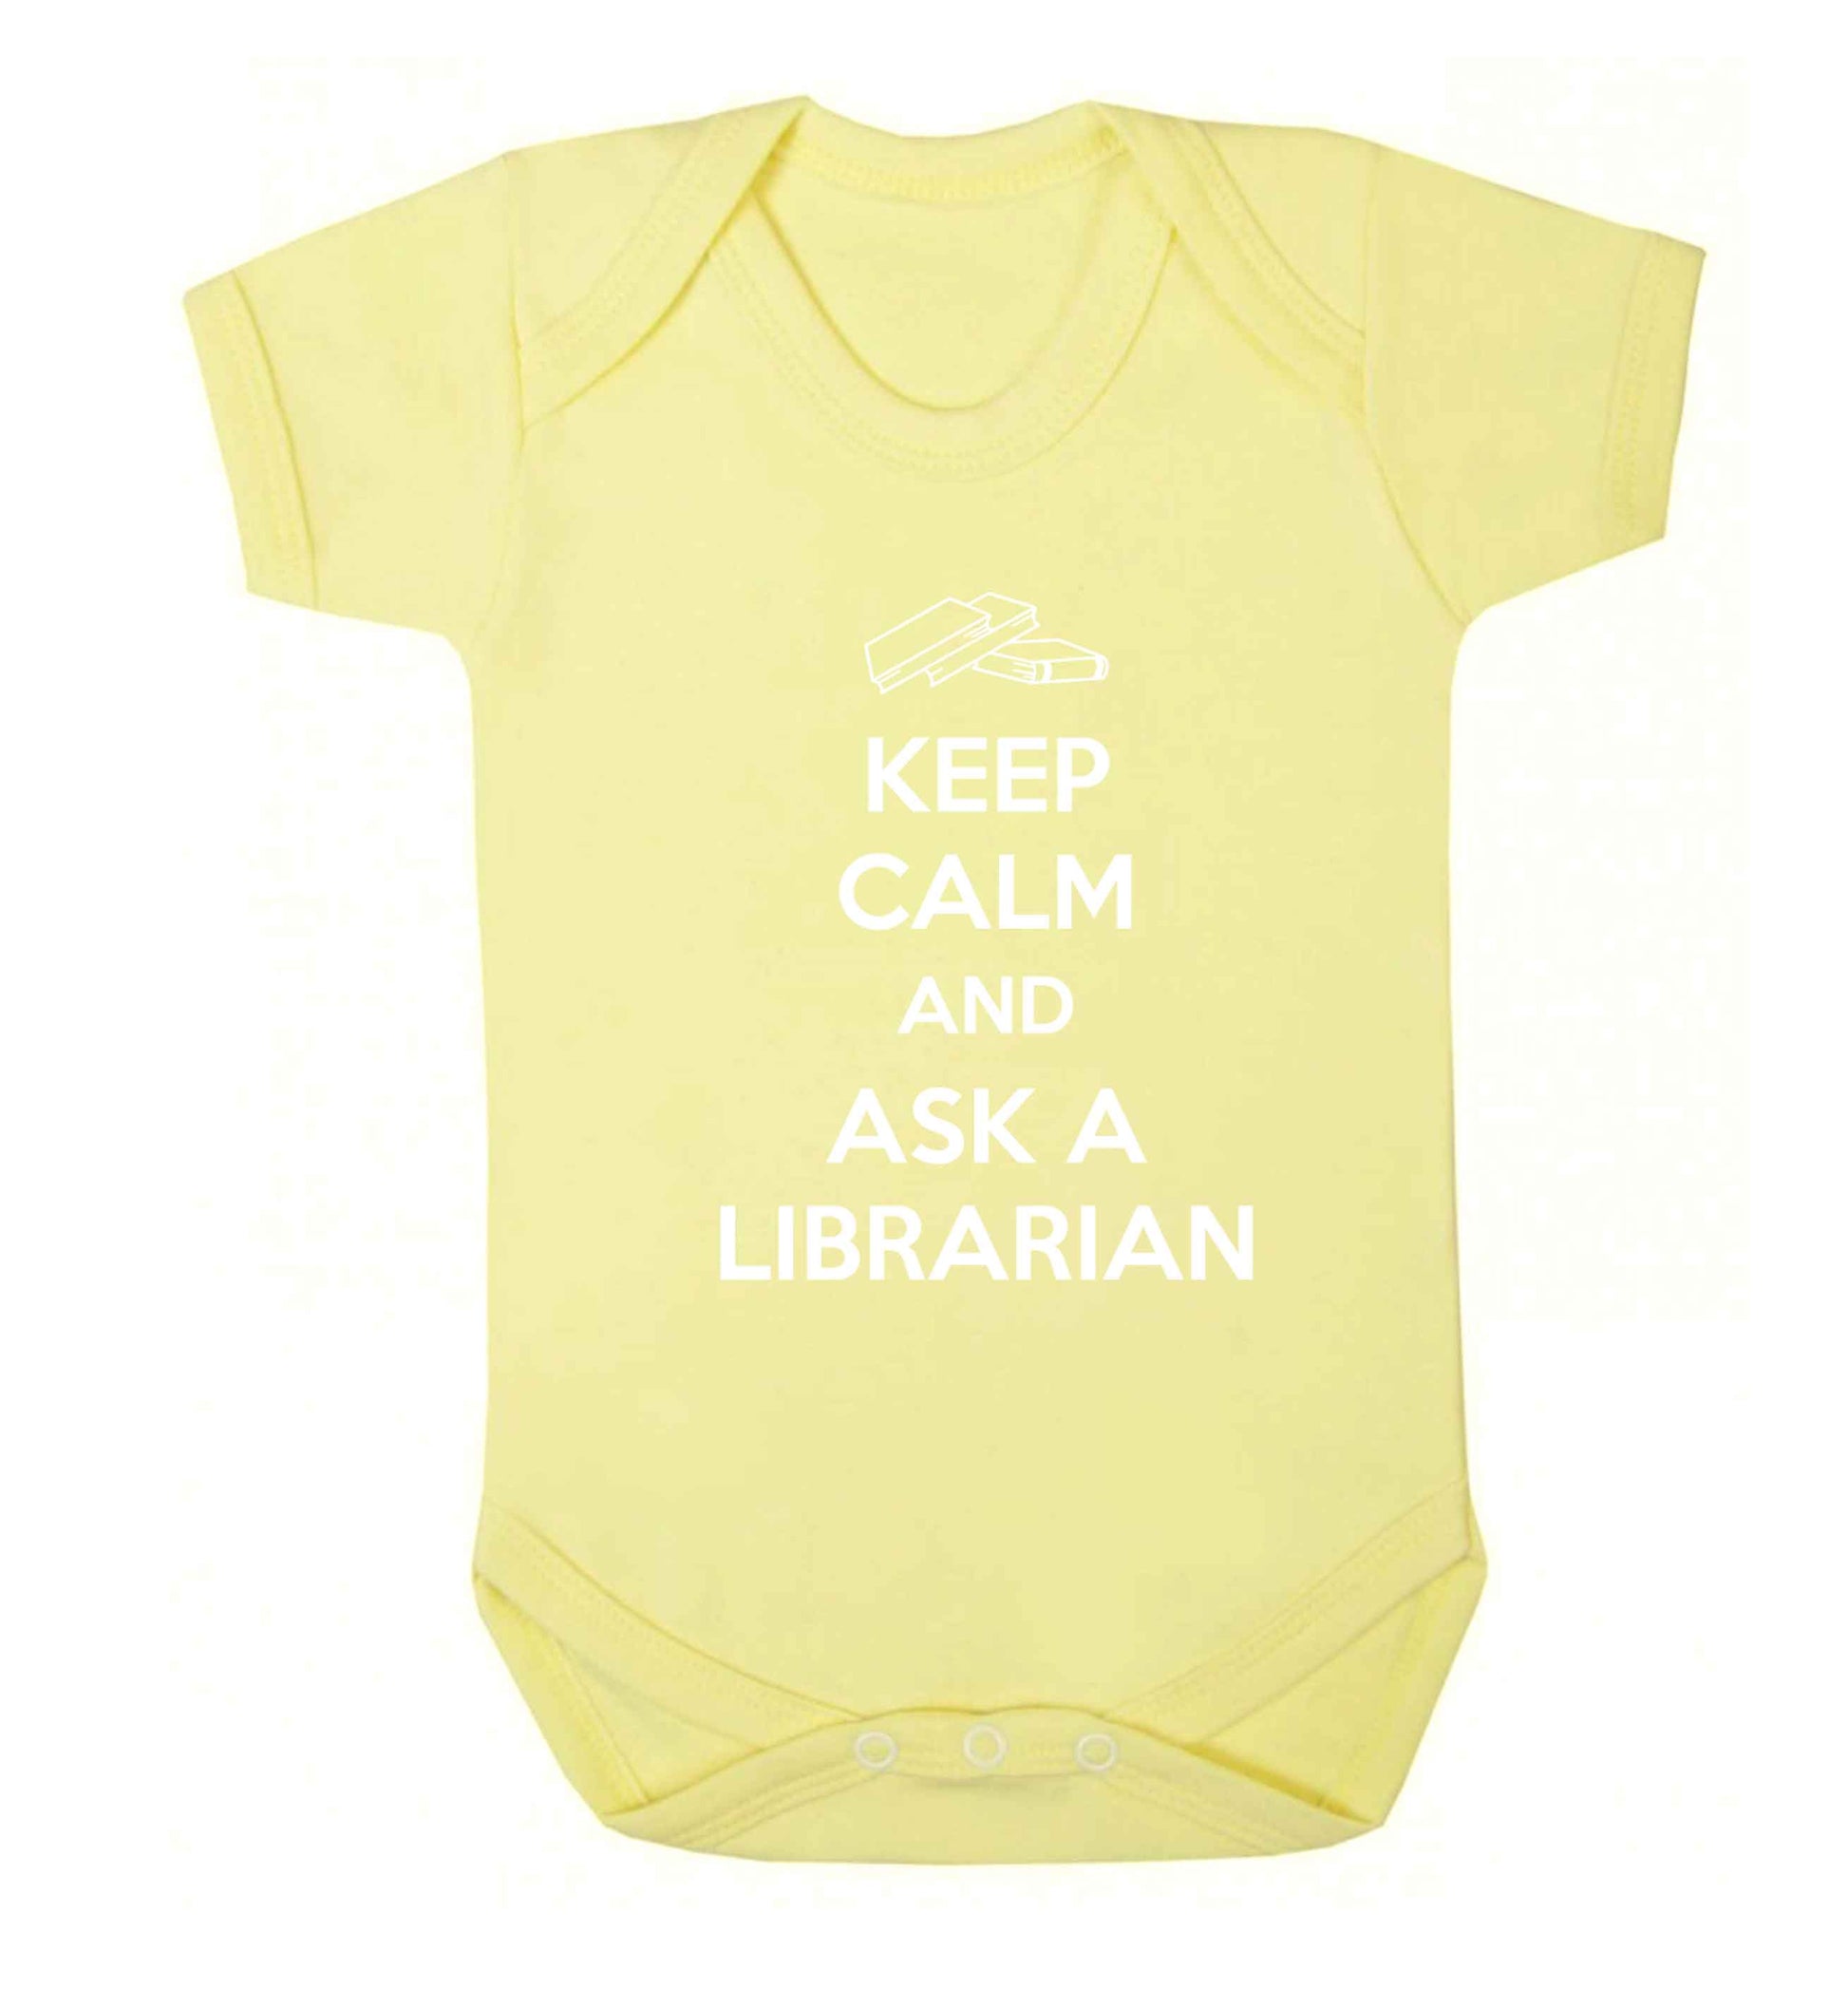 Keep calm and ask a librarian Baby Vest pale yellow 18-24 months